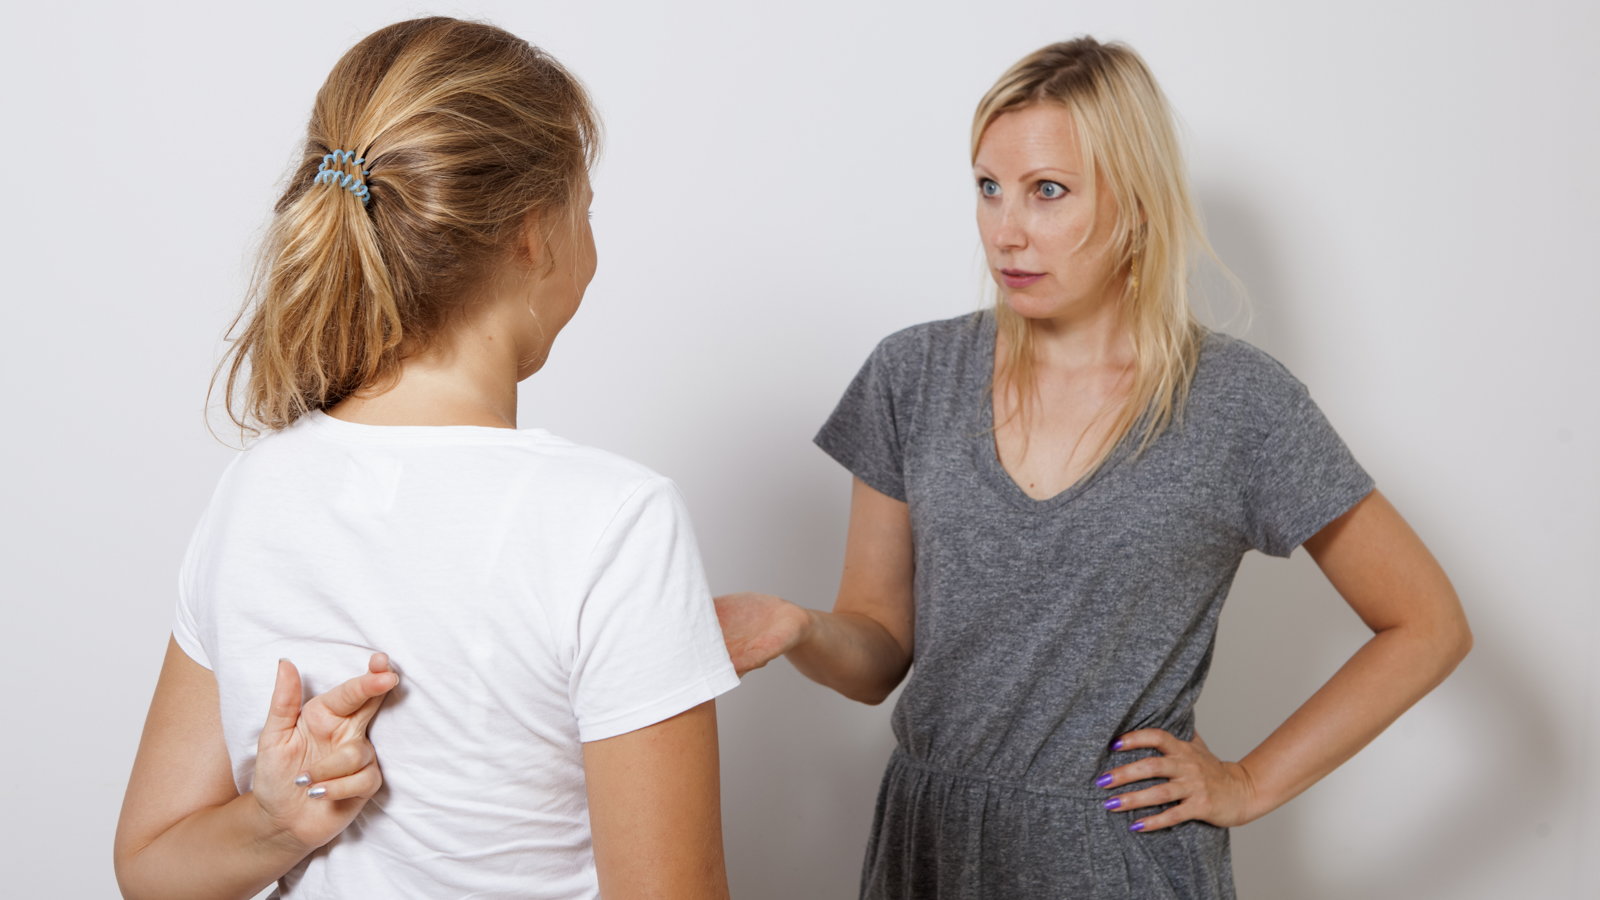 mom talking to teen who has fingers crossed behind her back